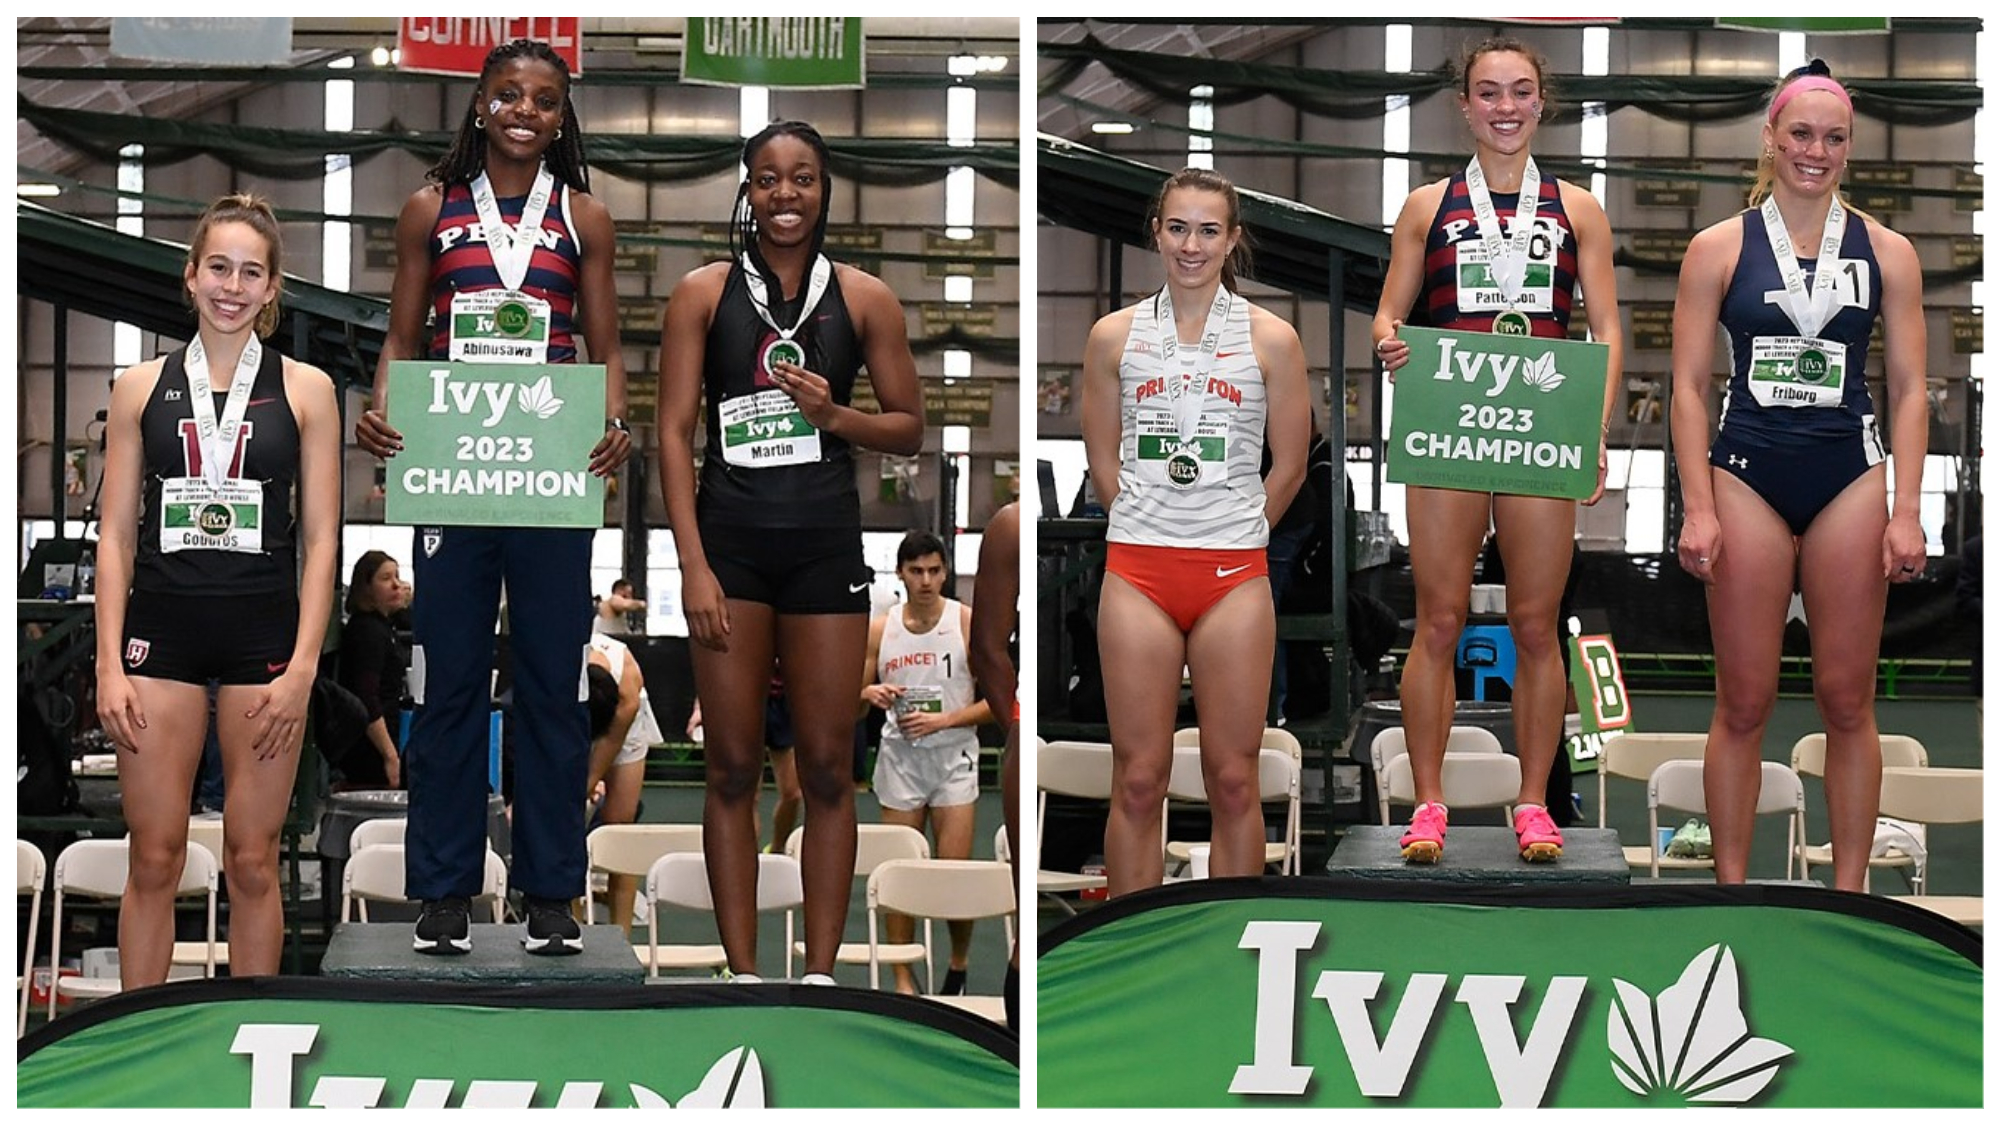 winners wearing medals after the Ivy League Indoor Heptagonal Championships: top winners were Abinusawa and Patterson. 